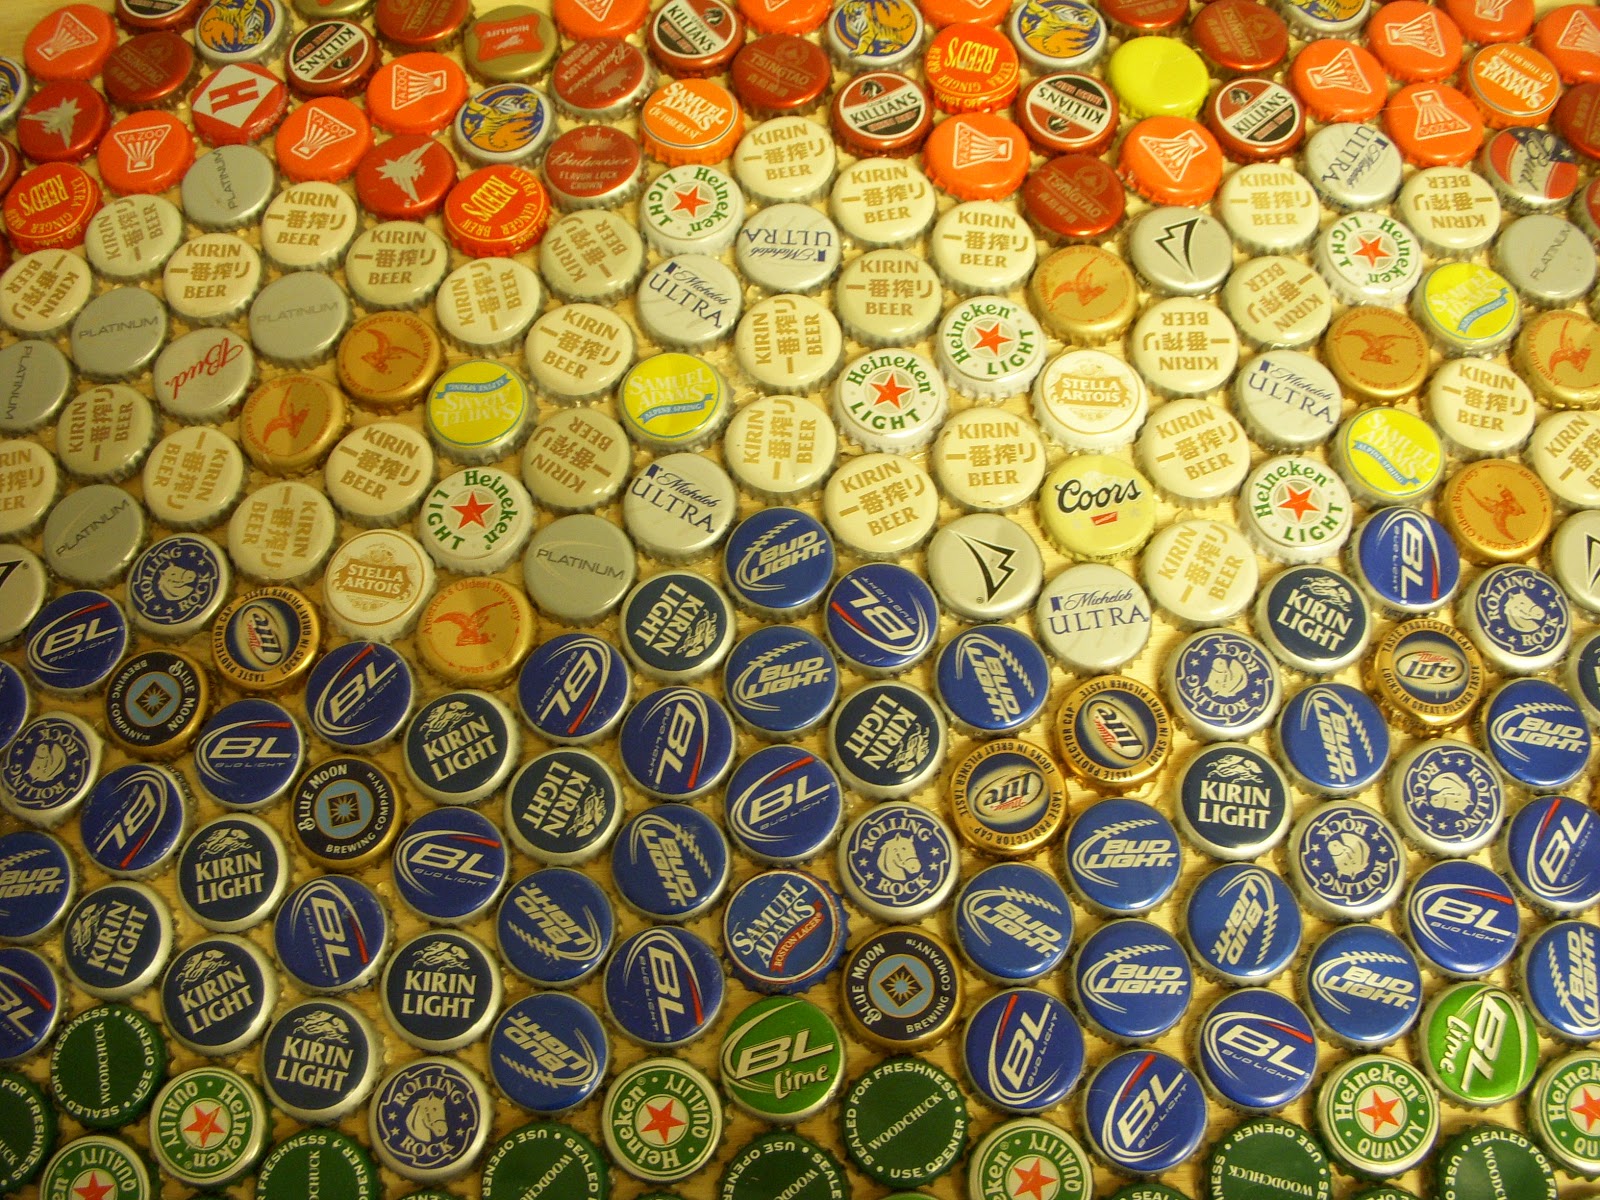 Who's-its and What's-its: Beer Bottle Top Table